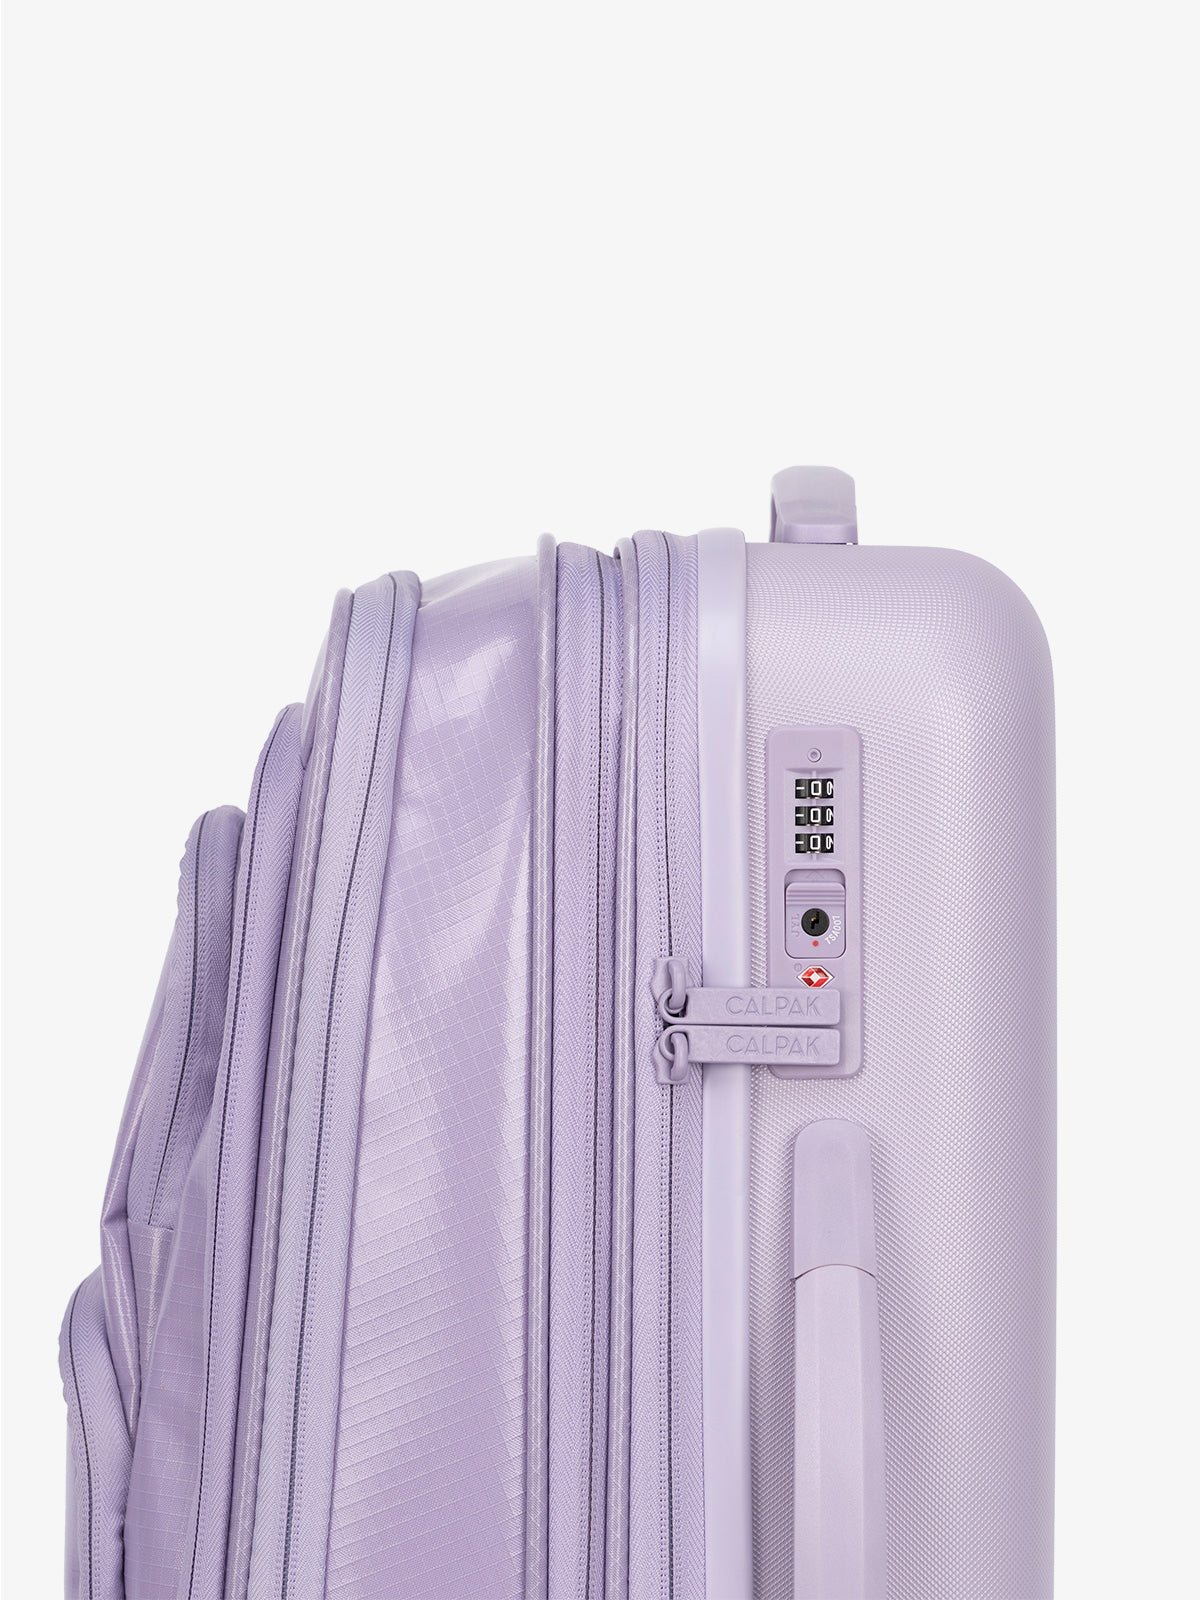 CALPAK Terra Carry-On expandable Luggage with soft and hard shell exterior TSA lock in amethyst